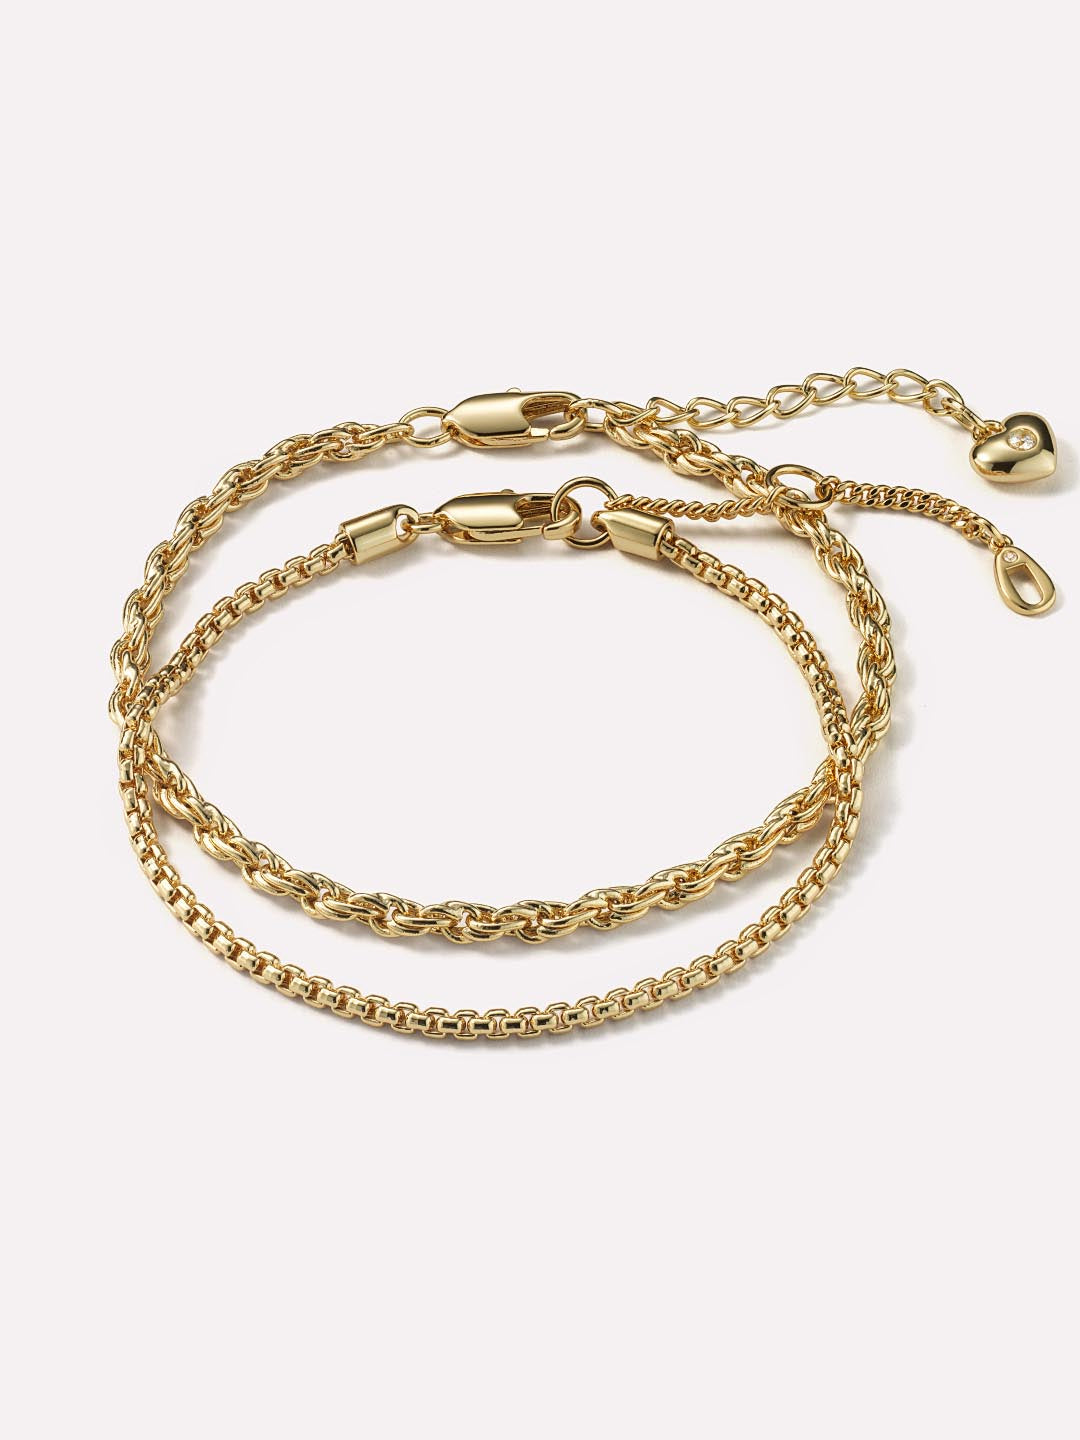 Bracelet Set - Gold Bracelet Set | Ana Luisa | Online Jewelry Store At  Prices You'll Love